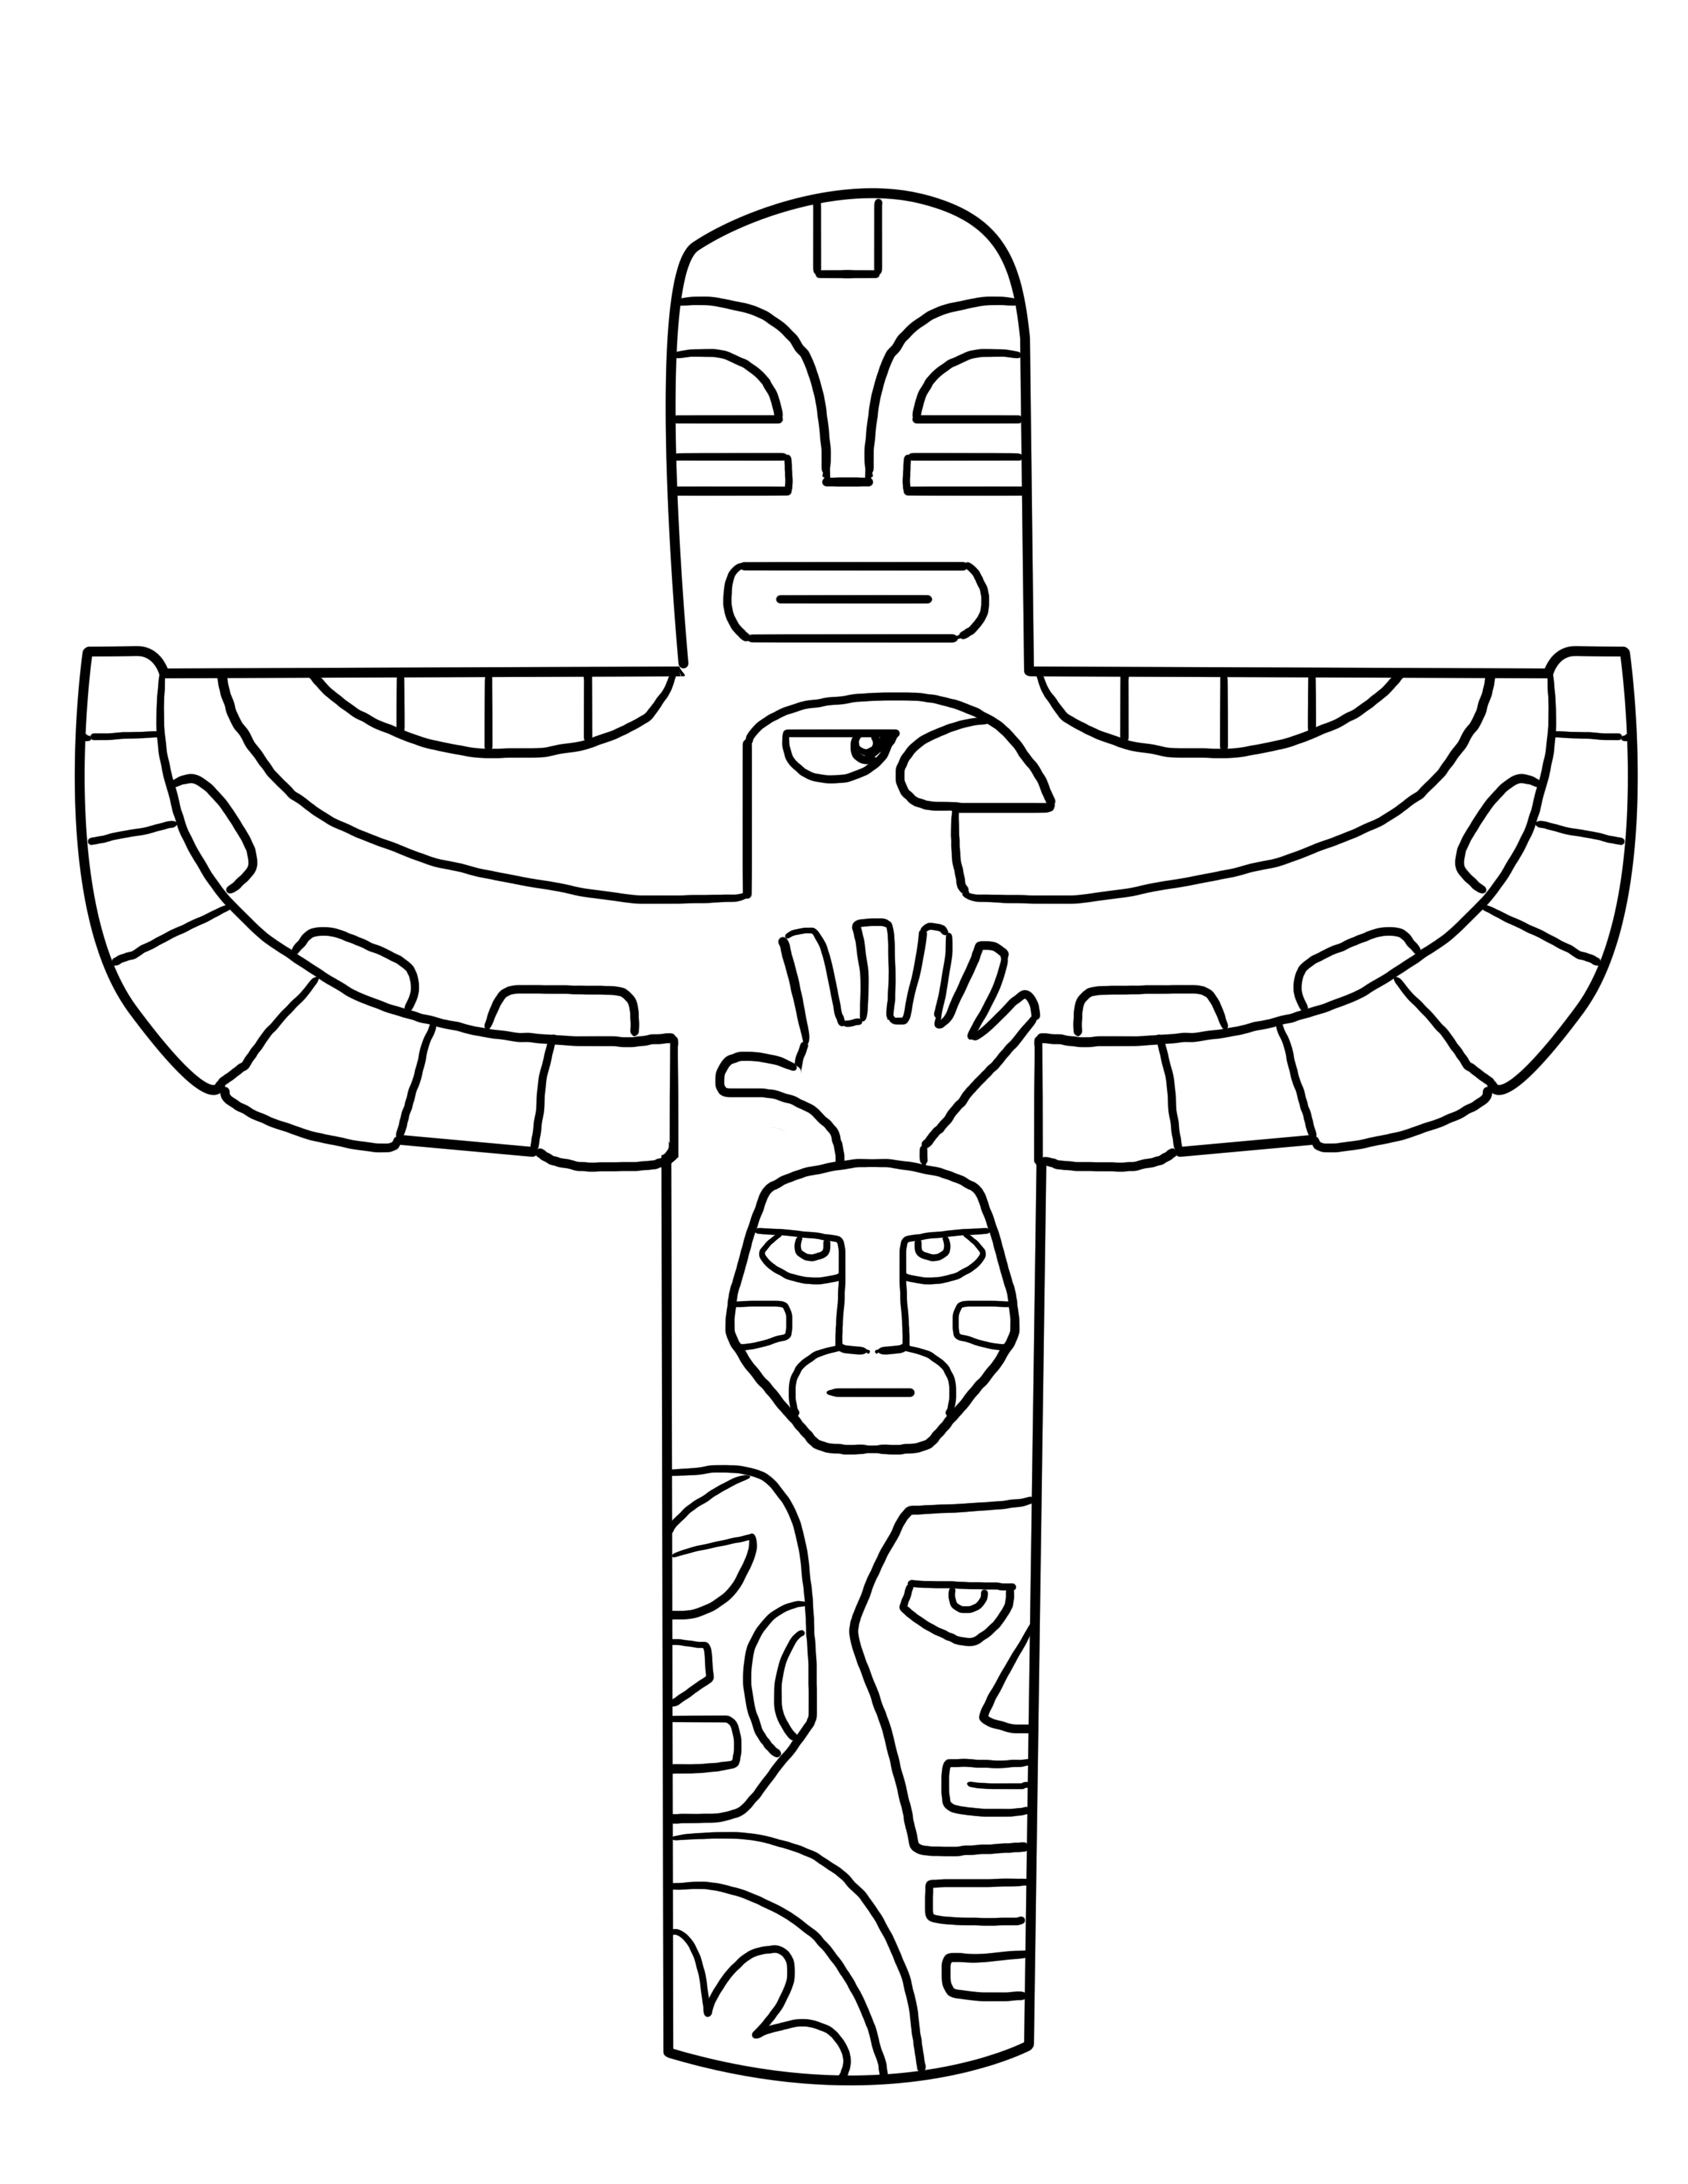 86 Christian Symbols Coloring Pages Download Free Images